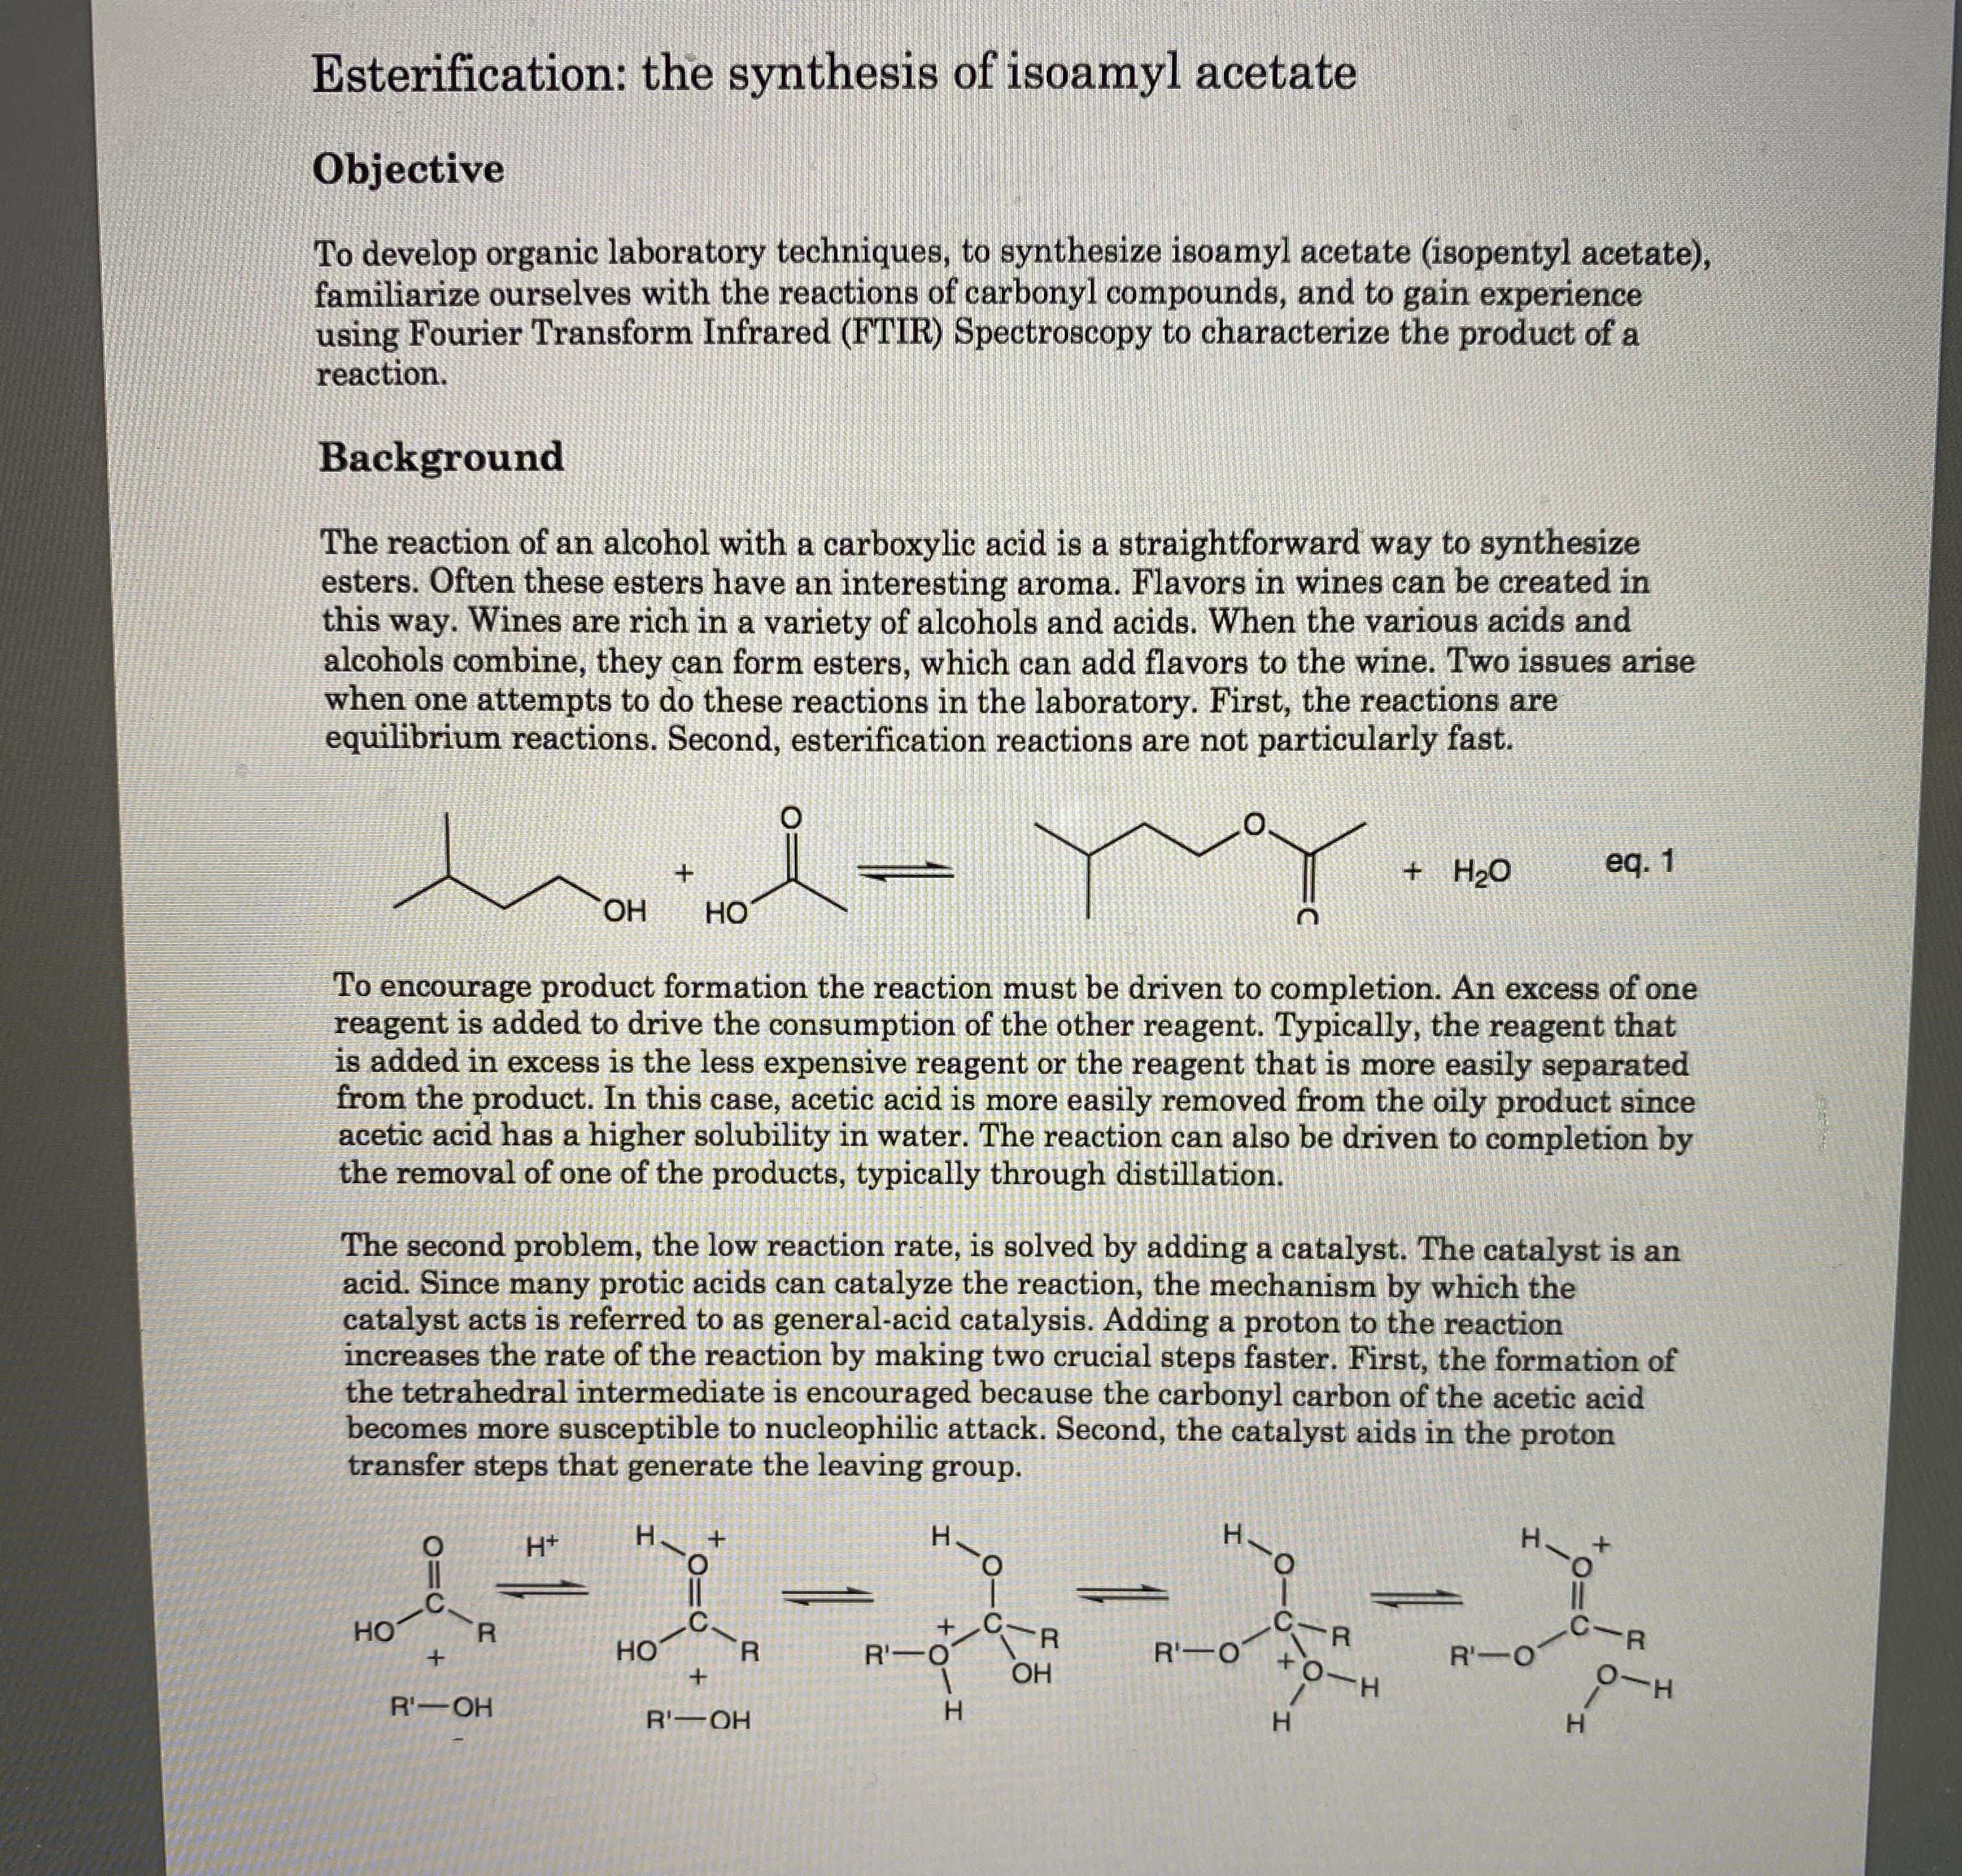 Esterification: the synthesis of isoamyl acetate
Objective
To develop organic laboratory techniques, to synthesize isoamyl acetate (isopentyl acetate),
familiarize ourselves with the reactions of carbonyl compounds, and to gain experience
using Fourier Transform Infrared (FTIR) Spectroscopy to characterize the product of a
reaction.
Background
The reaction of an alcohol with a carboxylic acid is a straightforward way to synthesize
esters. Often these esters have an interesting aroma. Flavors in wines can be created in
this way. Wines are rich in a variety of alcohols and acids. When the various acids and
alcohols combine, they can form esters, which can add flavors to the wine. Two issues arise
when one attempts to do these reactions in the laboratory. First, the reactions are
equilibrium reactions. Second, esterification reactions are not particularly fast.
O.
+ H2O
eq. 1
ОН
Но
To encourage product formation the reaction must be driven to completion. An excess of one
reagent is added to drive the consumption of the other reagent. Typically, the reagent that
is added in excess is the less expensive reagent or the reagent that is more easily separated
from the product. In this case, acetic acid is more easily removed from the oily product since
acetic acid has a higher solubility in water. The reaction can also be driven to completion by
the removal of one of the products, typically through distillation.
The second problem, the low reaction rate, is solved by adding a catalyst. The catalyst is an
acid. Since many protic acids can catalyze the reaction, the mechanism by which the
catalyst acts is referred to as general-acid catalysis. Adding a proton to the reaction
increases the rate of the reaction by making two crucial steps faster. First, the formation of
the tetrahedral intermediate is encouraged because the carbonyl carbon of the acetic acid
becomes more susceptible to nucleophilic attack. Second, the catalyst aids in the proton
transfer steps that generate the leaving group.
Н+
н,
Н.
H.
H.
-C.
Но
.C
FR
%3D
C-R
Но
R'-O
R'-O
R'-O
ОН
0-H
R'-OH
R'-OH
H.
H.
